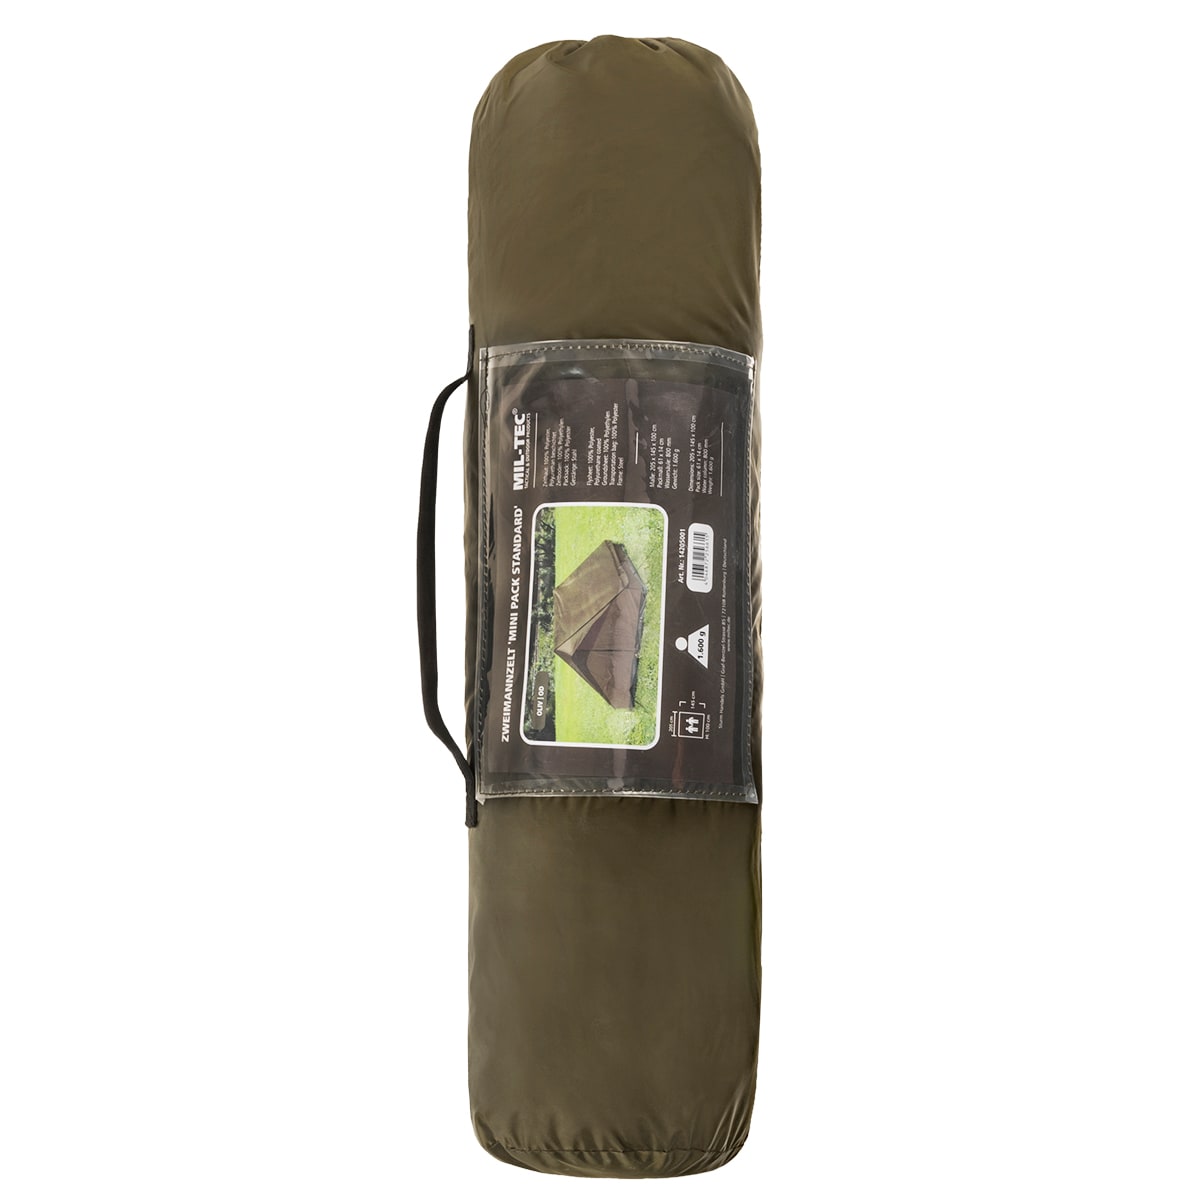 Namiot 2-osobowy Mil-Tec Mini Pack Standard - olive